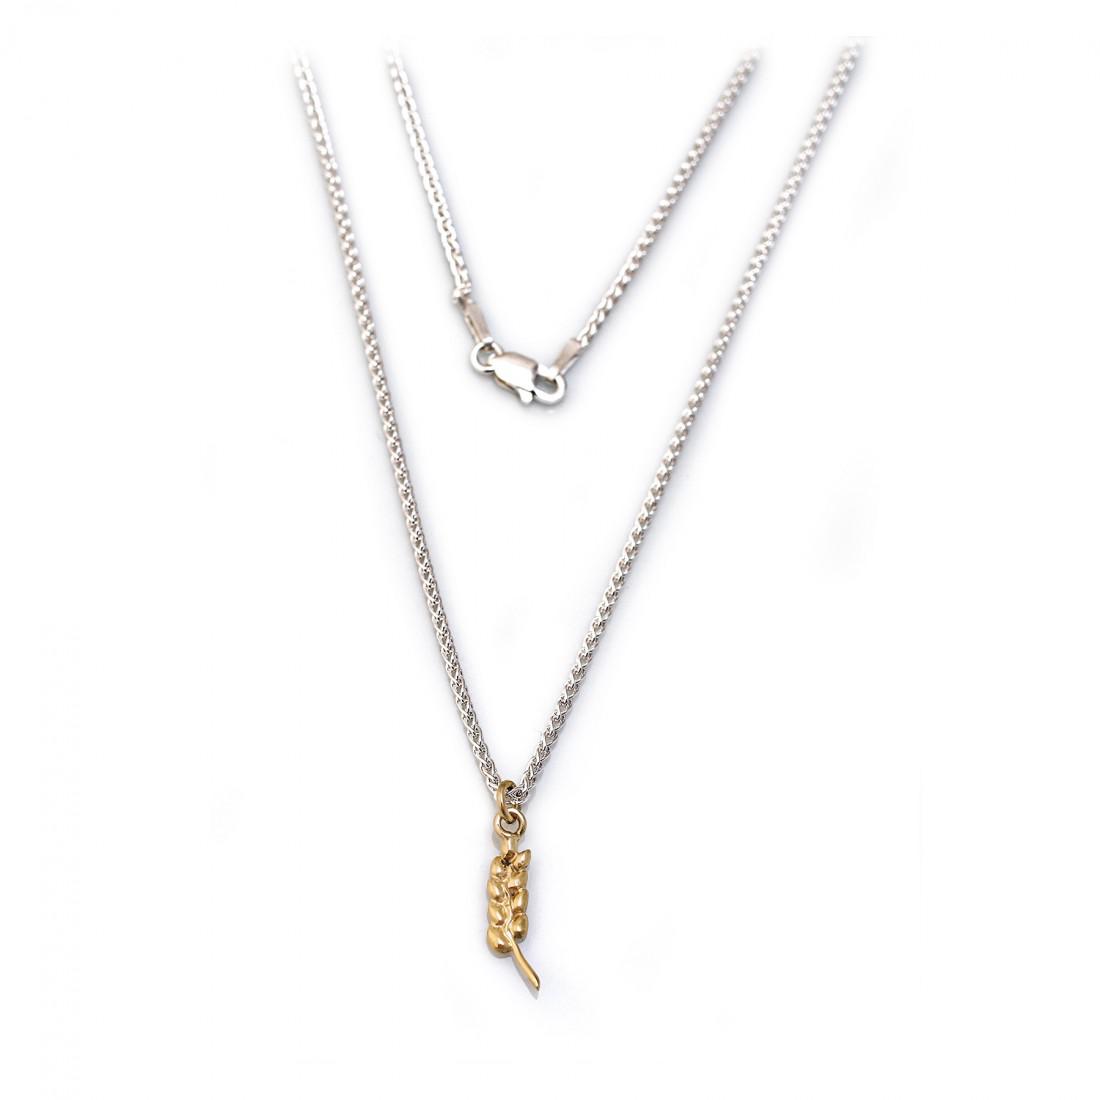 Exclusive Sterling Silver & 18ct Gold Plated Wheat Pendant With Chain